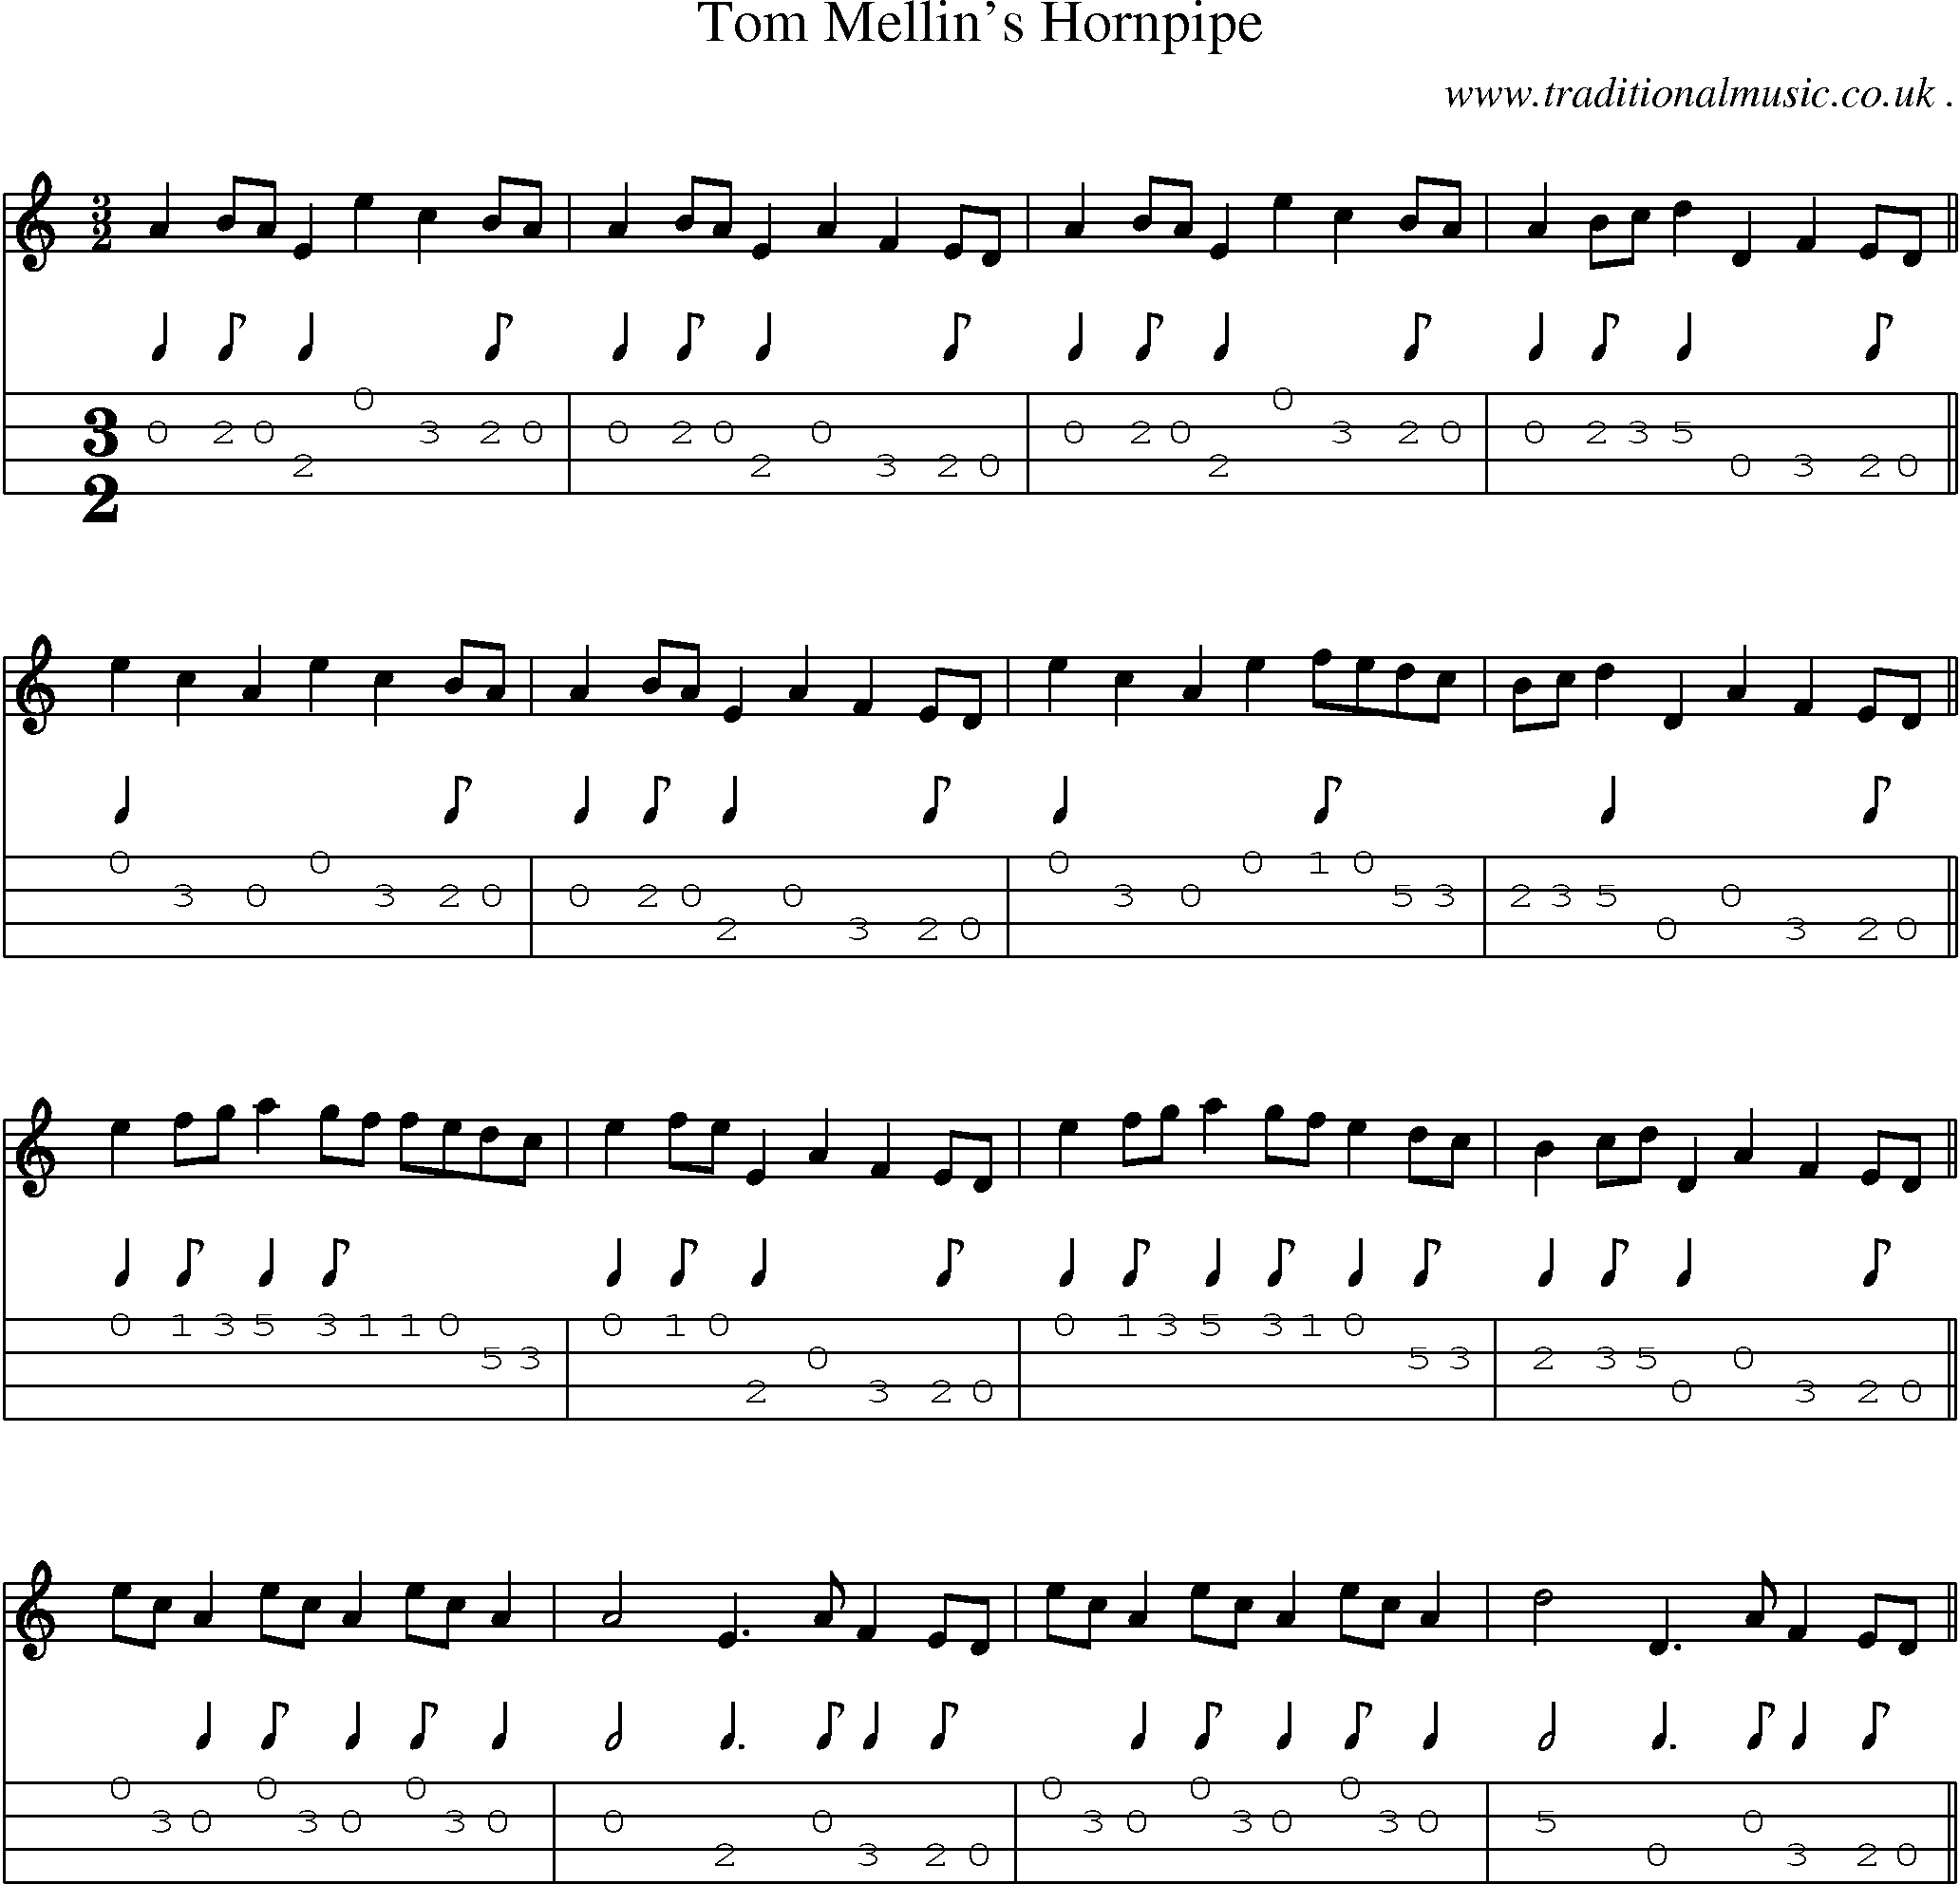 Sheet-Music and Mandolin Tabs for Tom Mellins Hornpipe